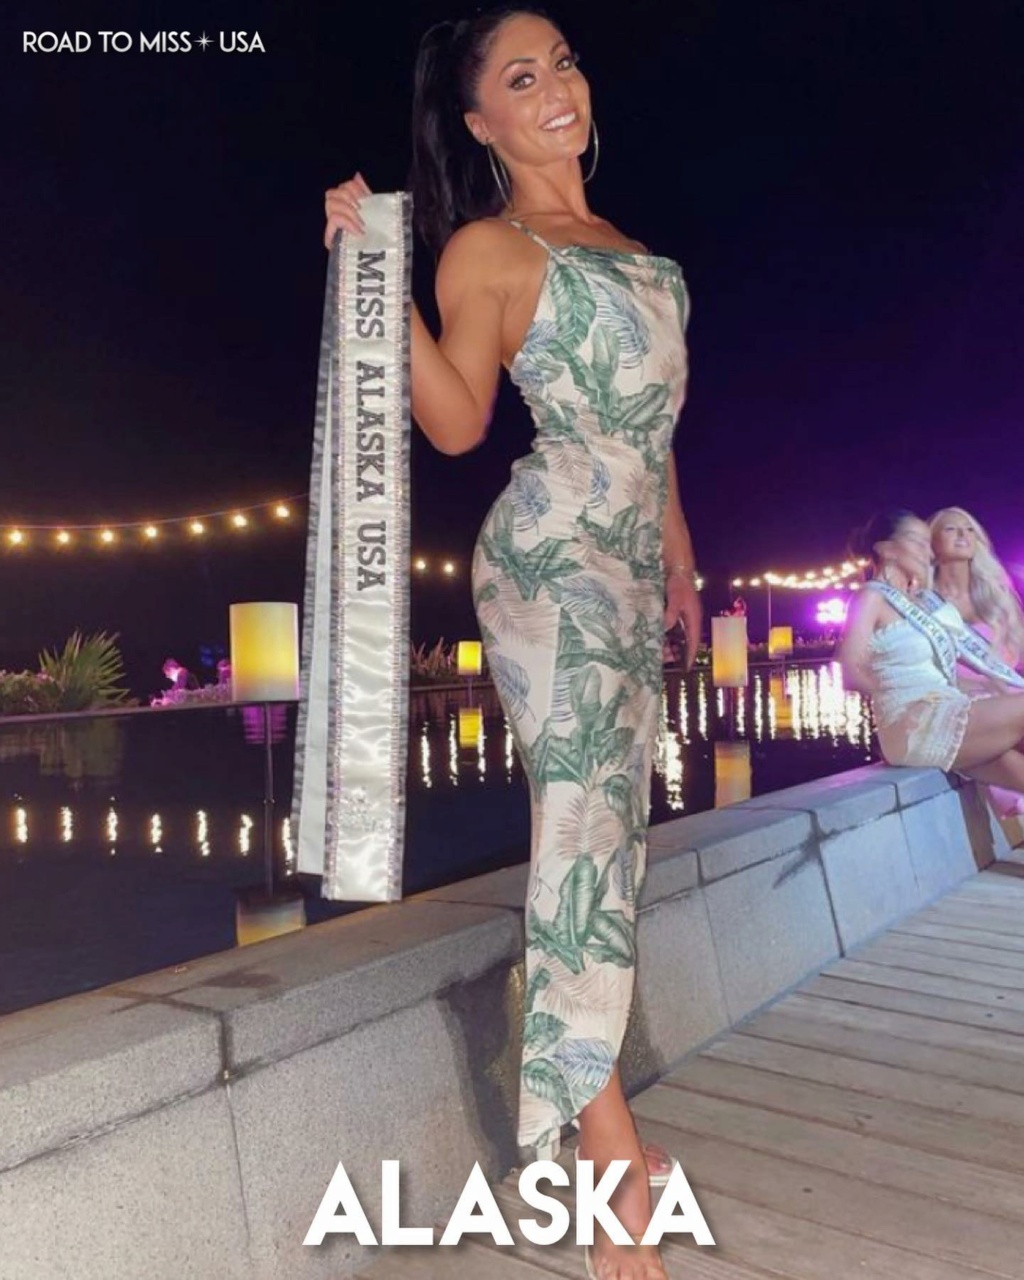 ROAD TO MISS USA 2021 is KENTUCKY! - Page 3 24200614